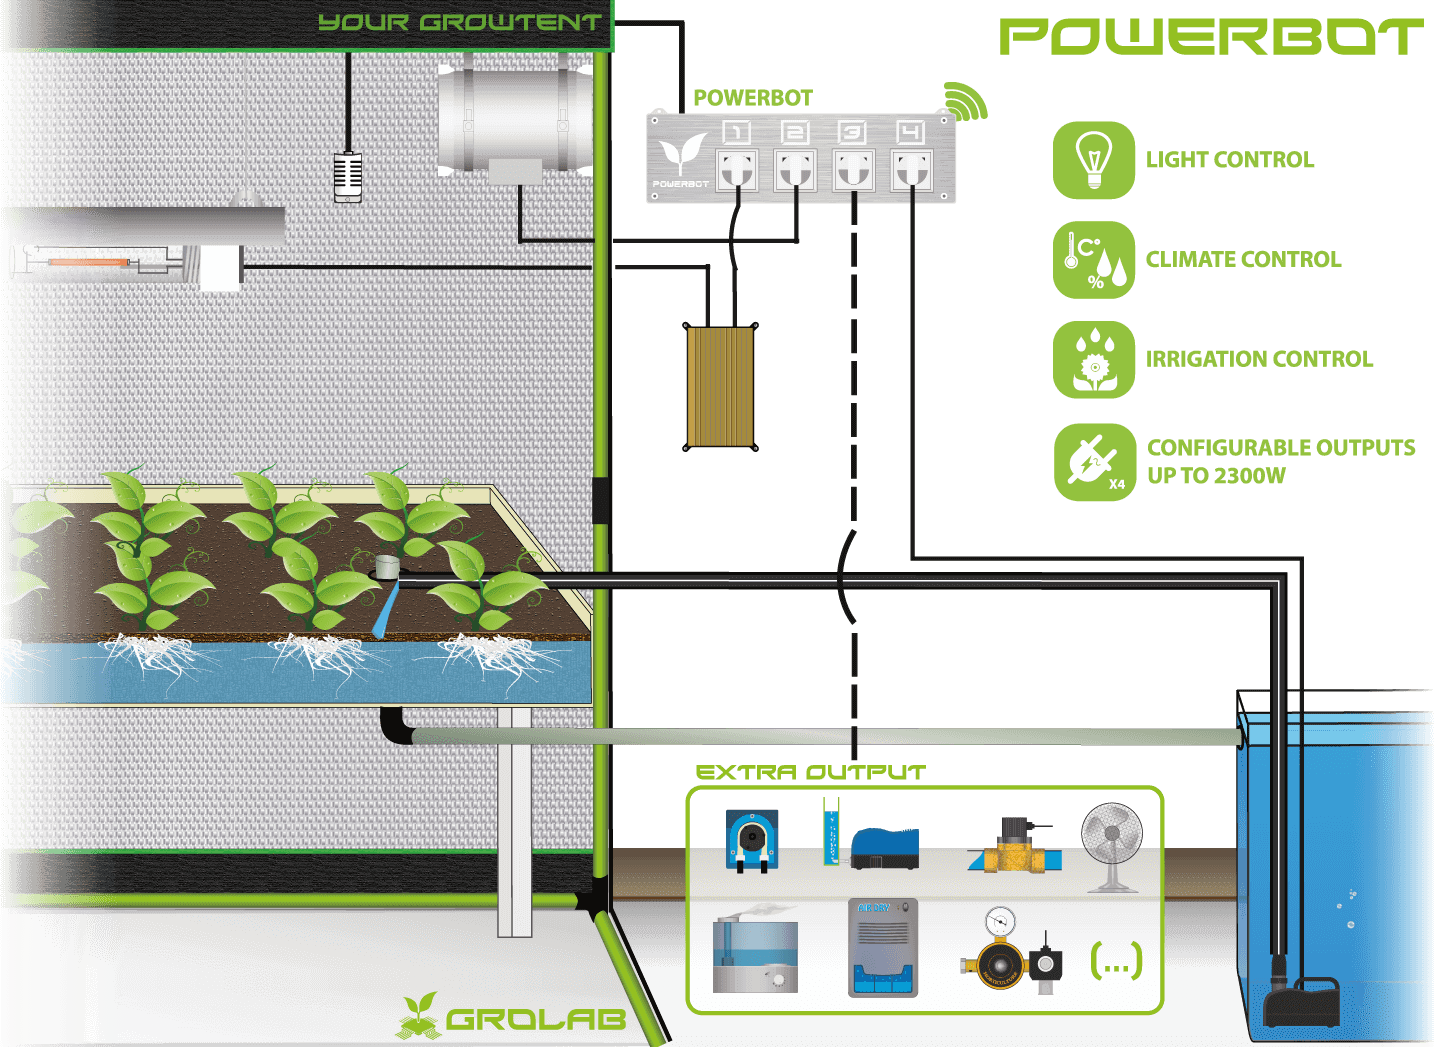 PowerBot configuration schematic example, the complete all in one GroLab™ system’s power module, controlling light, irrigation and climate